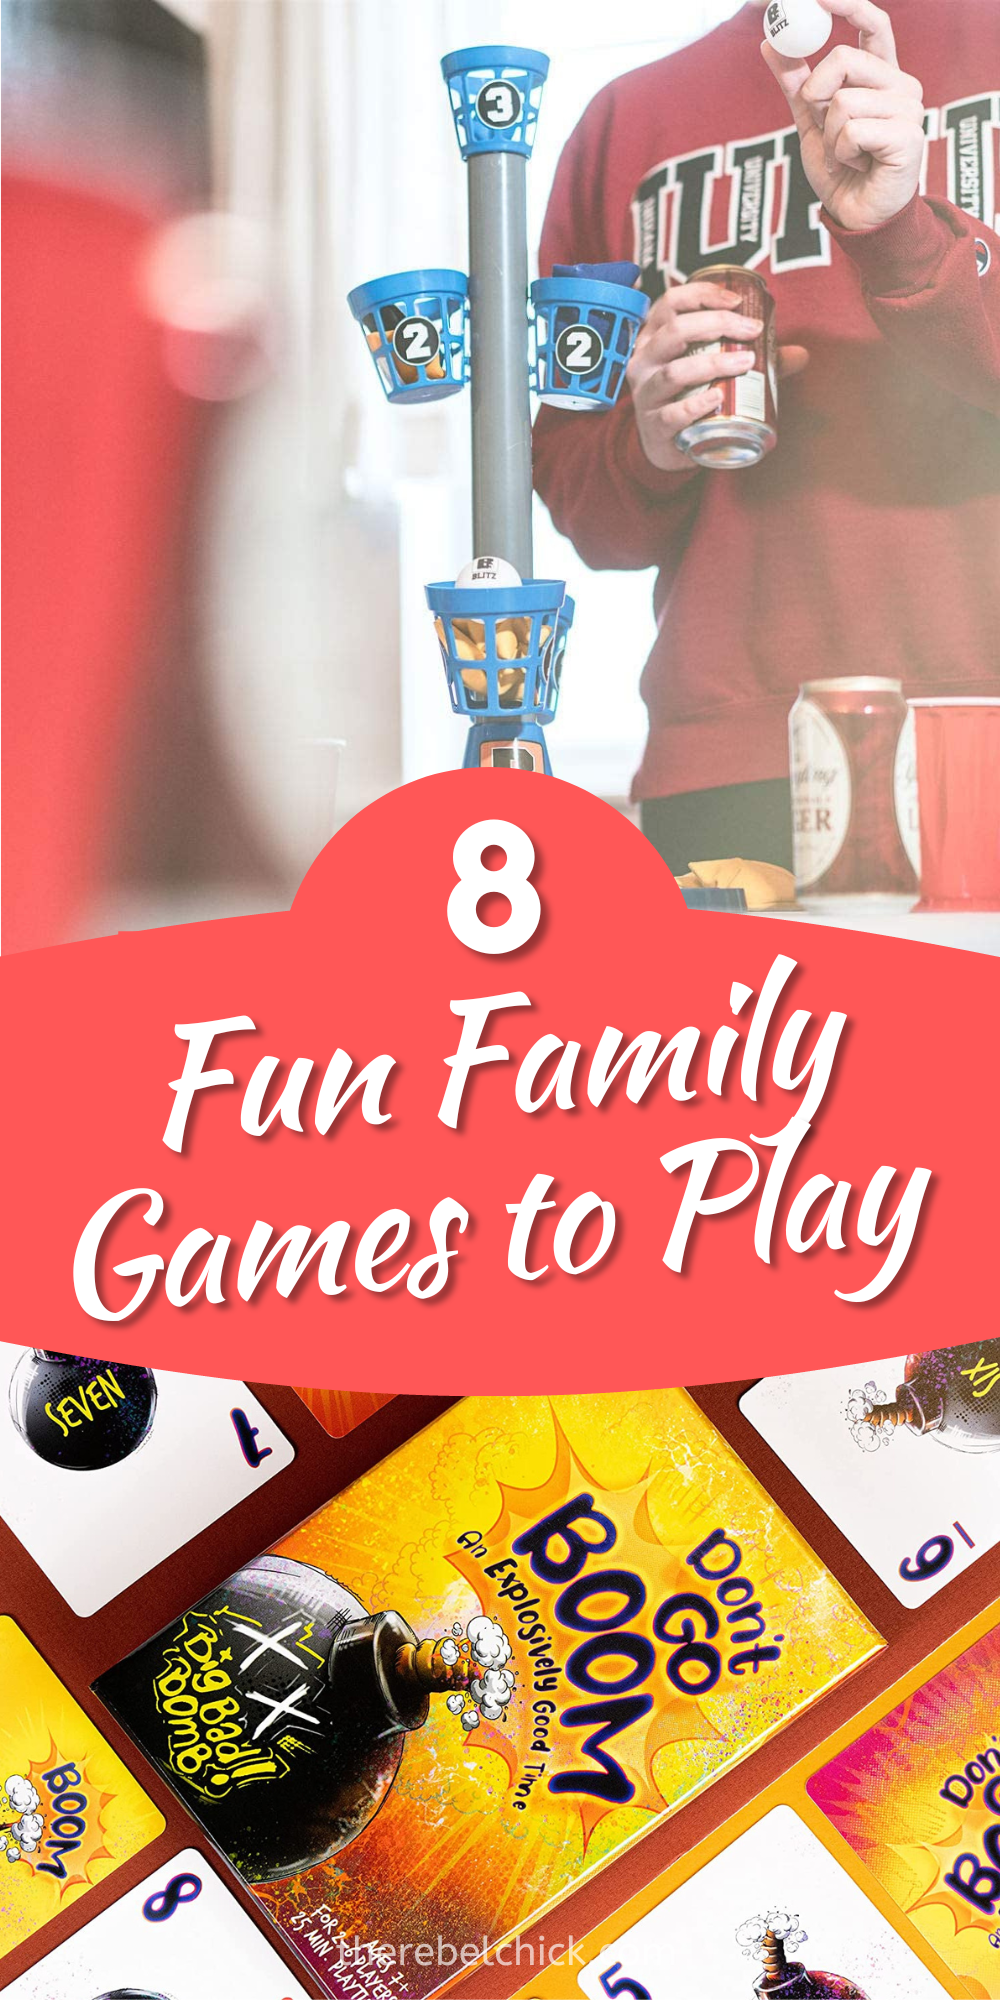 5 Fun Family Games to Play During the Holidays